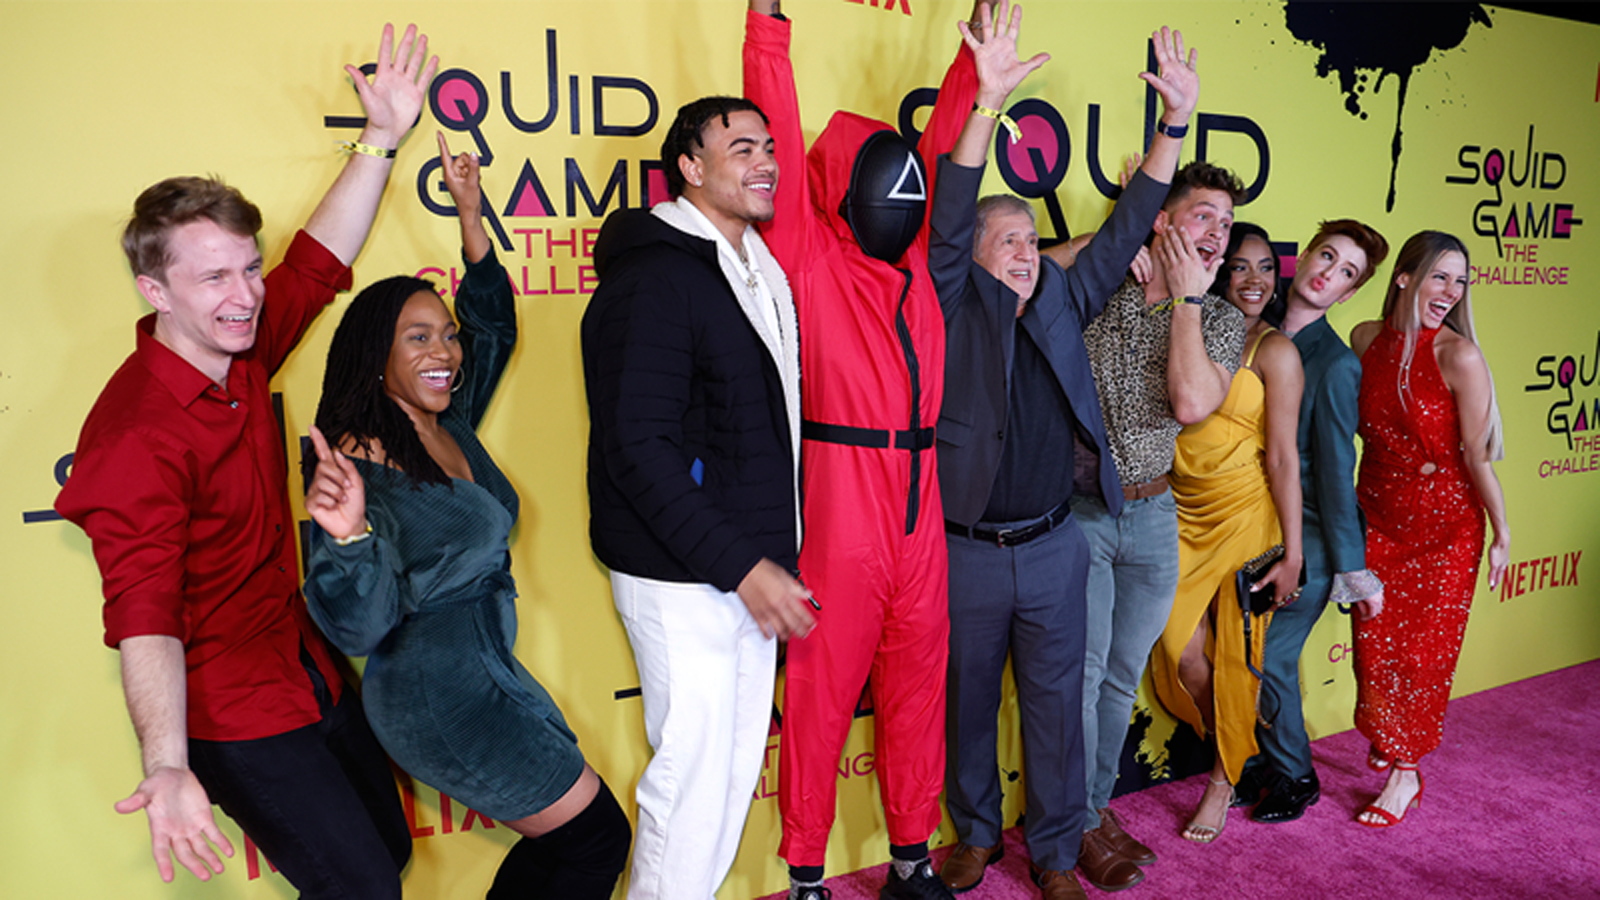 Squid Game: The Challenge' Players and Producers Talk Finale and Backlash